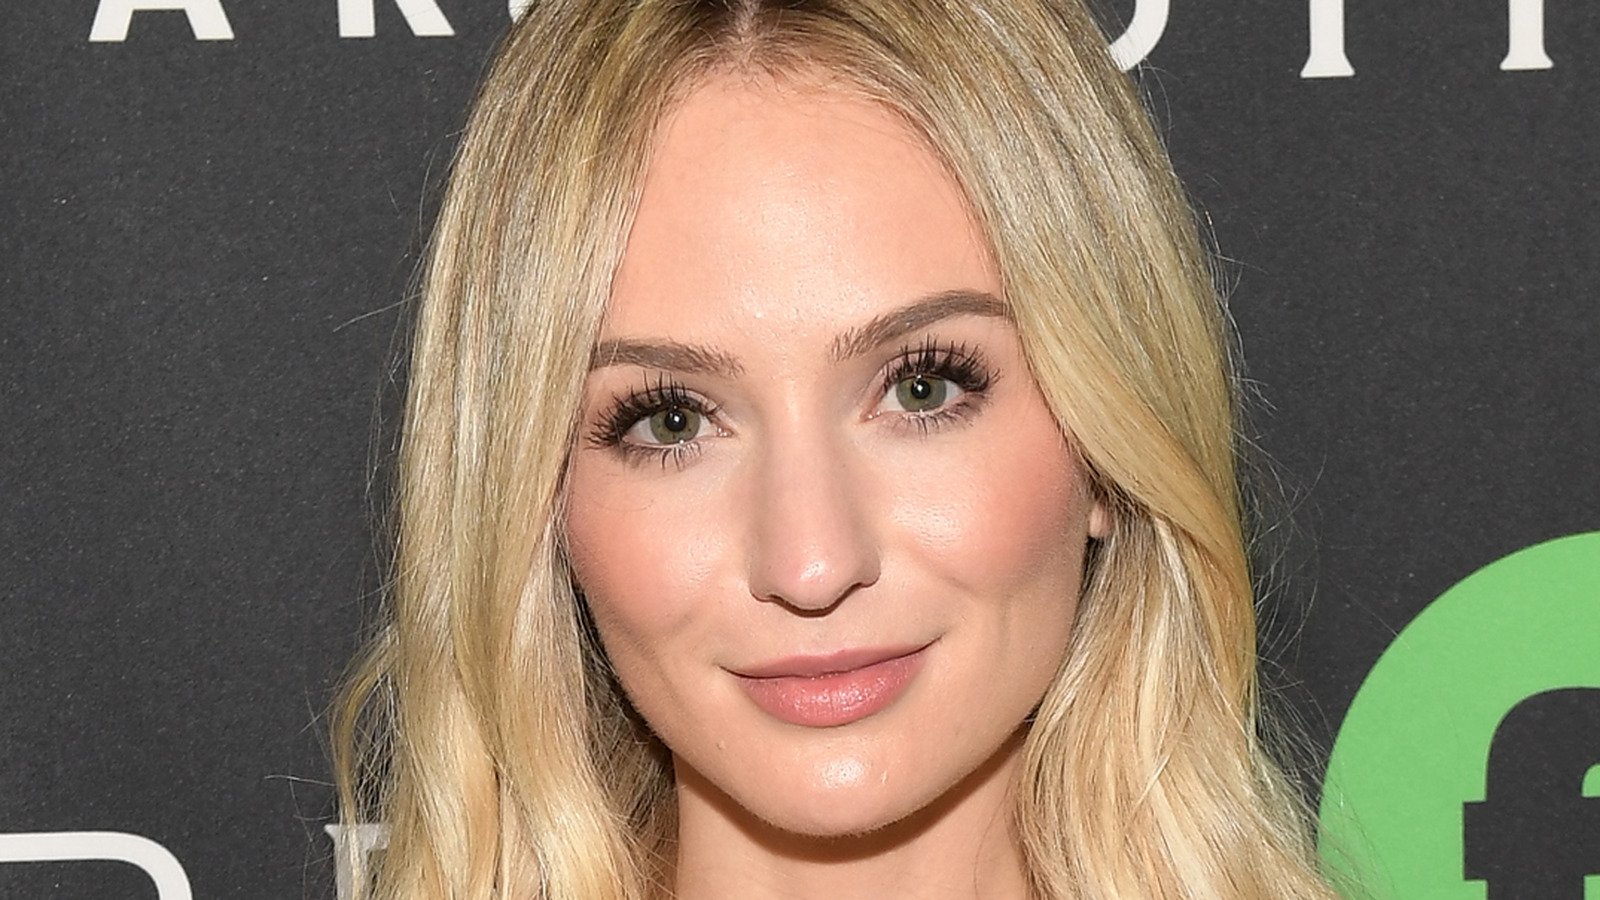 Lauren Bushnell Reveals The Plastic Surgery She's Had On Her Face